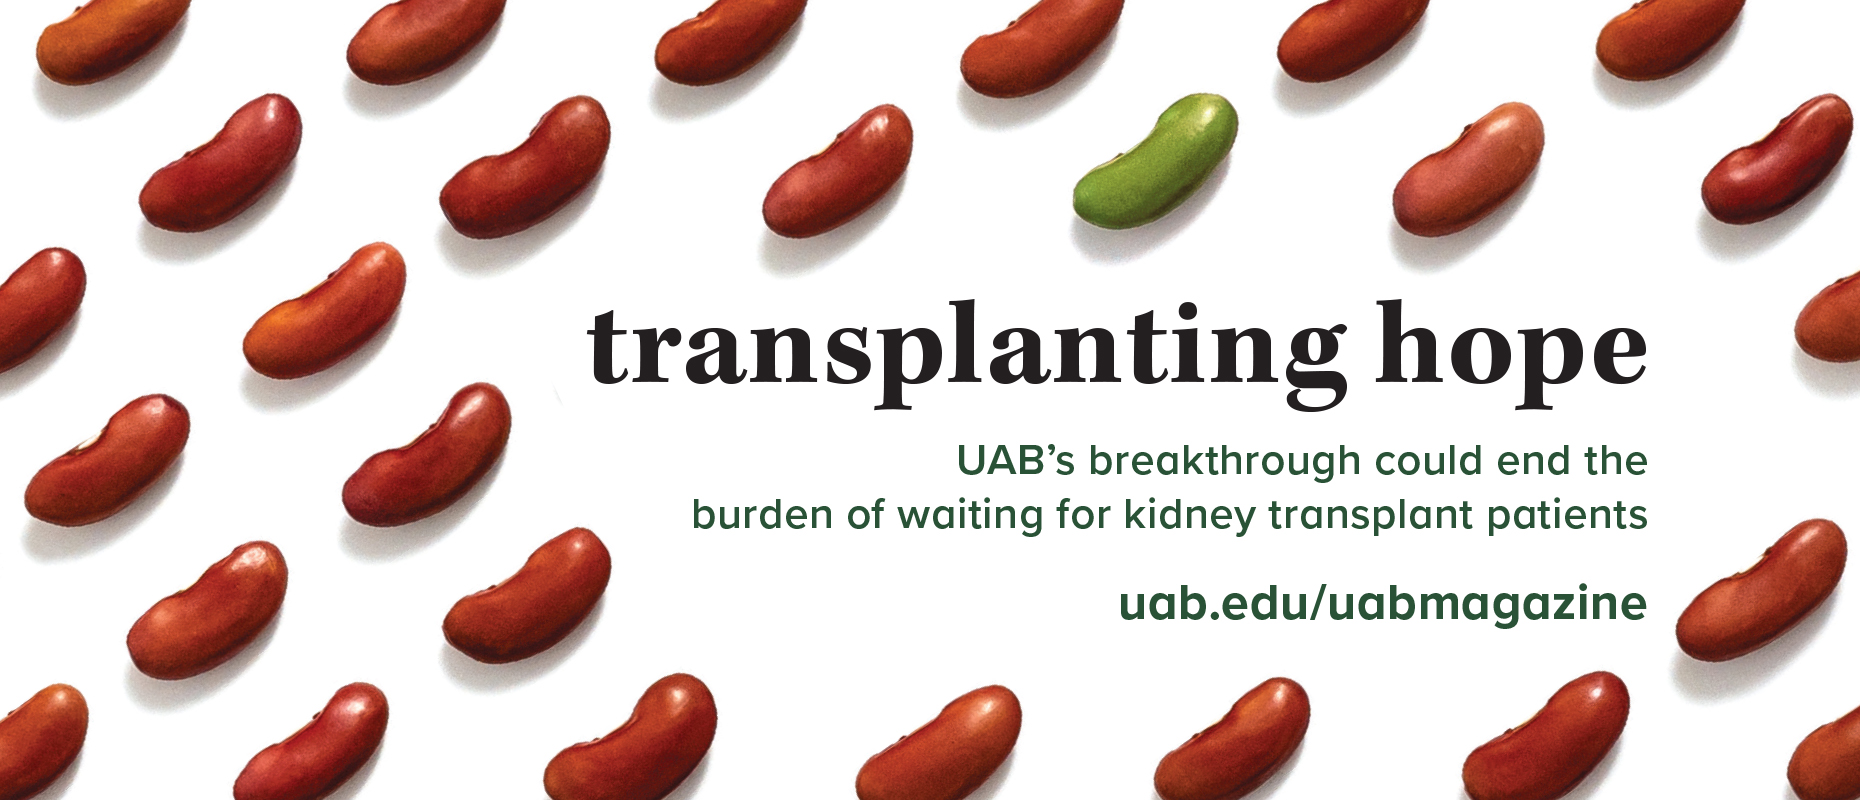 Transplanting Hope: UAB's breakthrough could end the burden of waiting for kidney transplant patients.